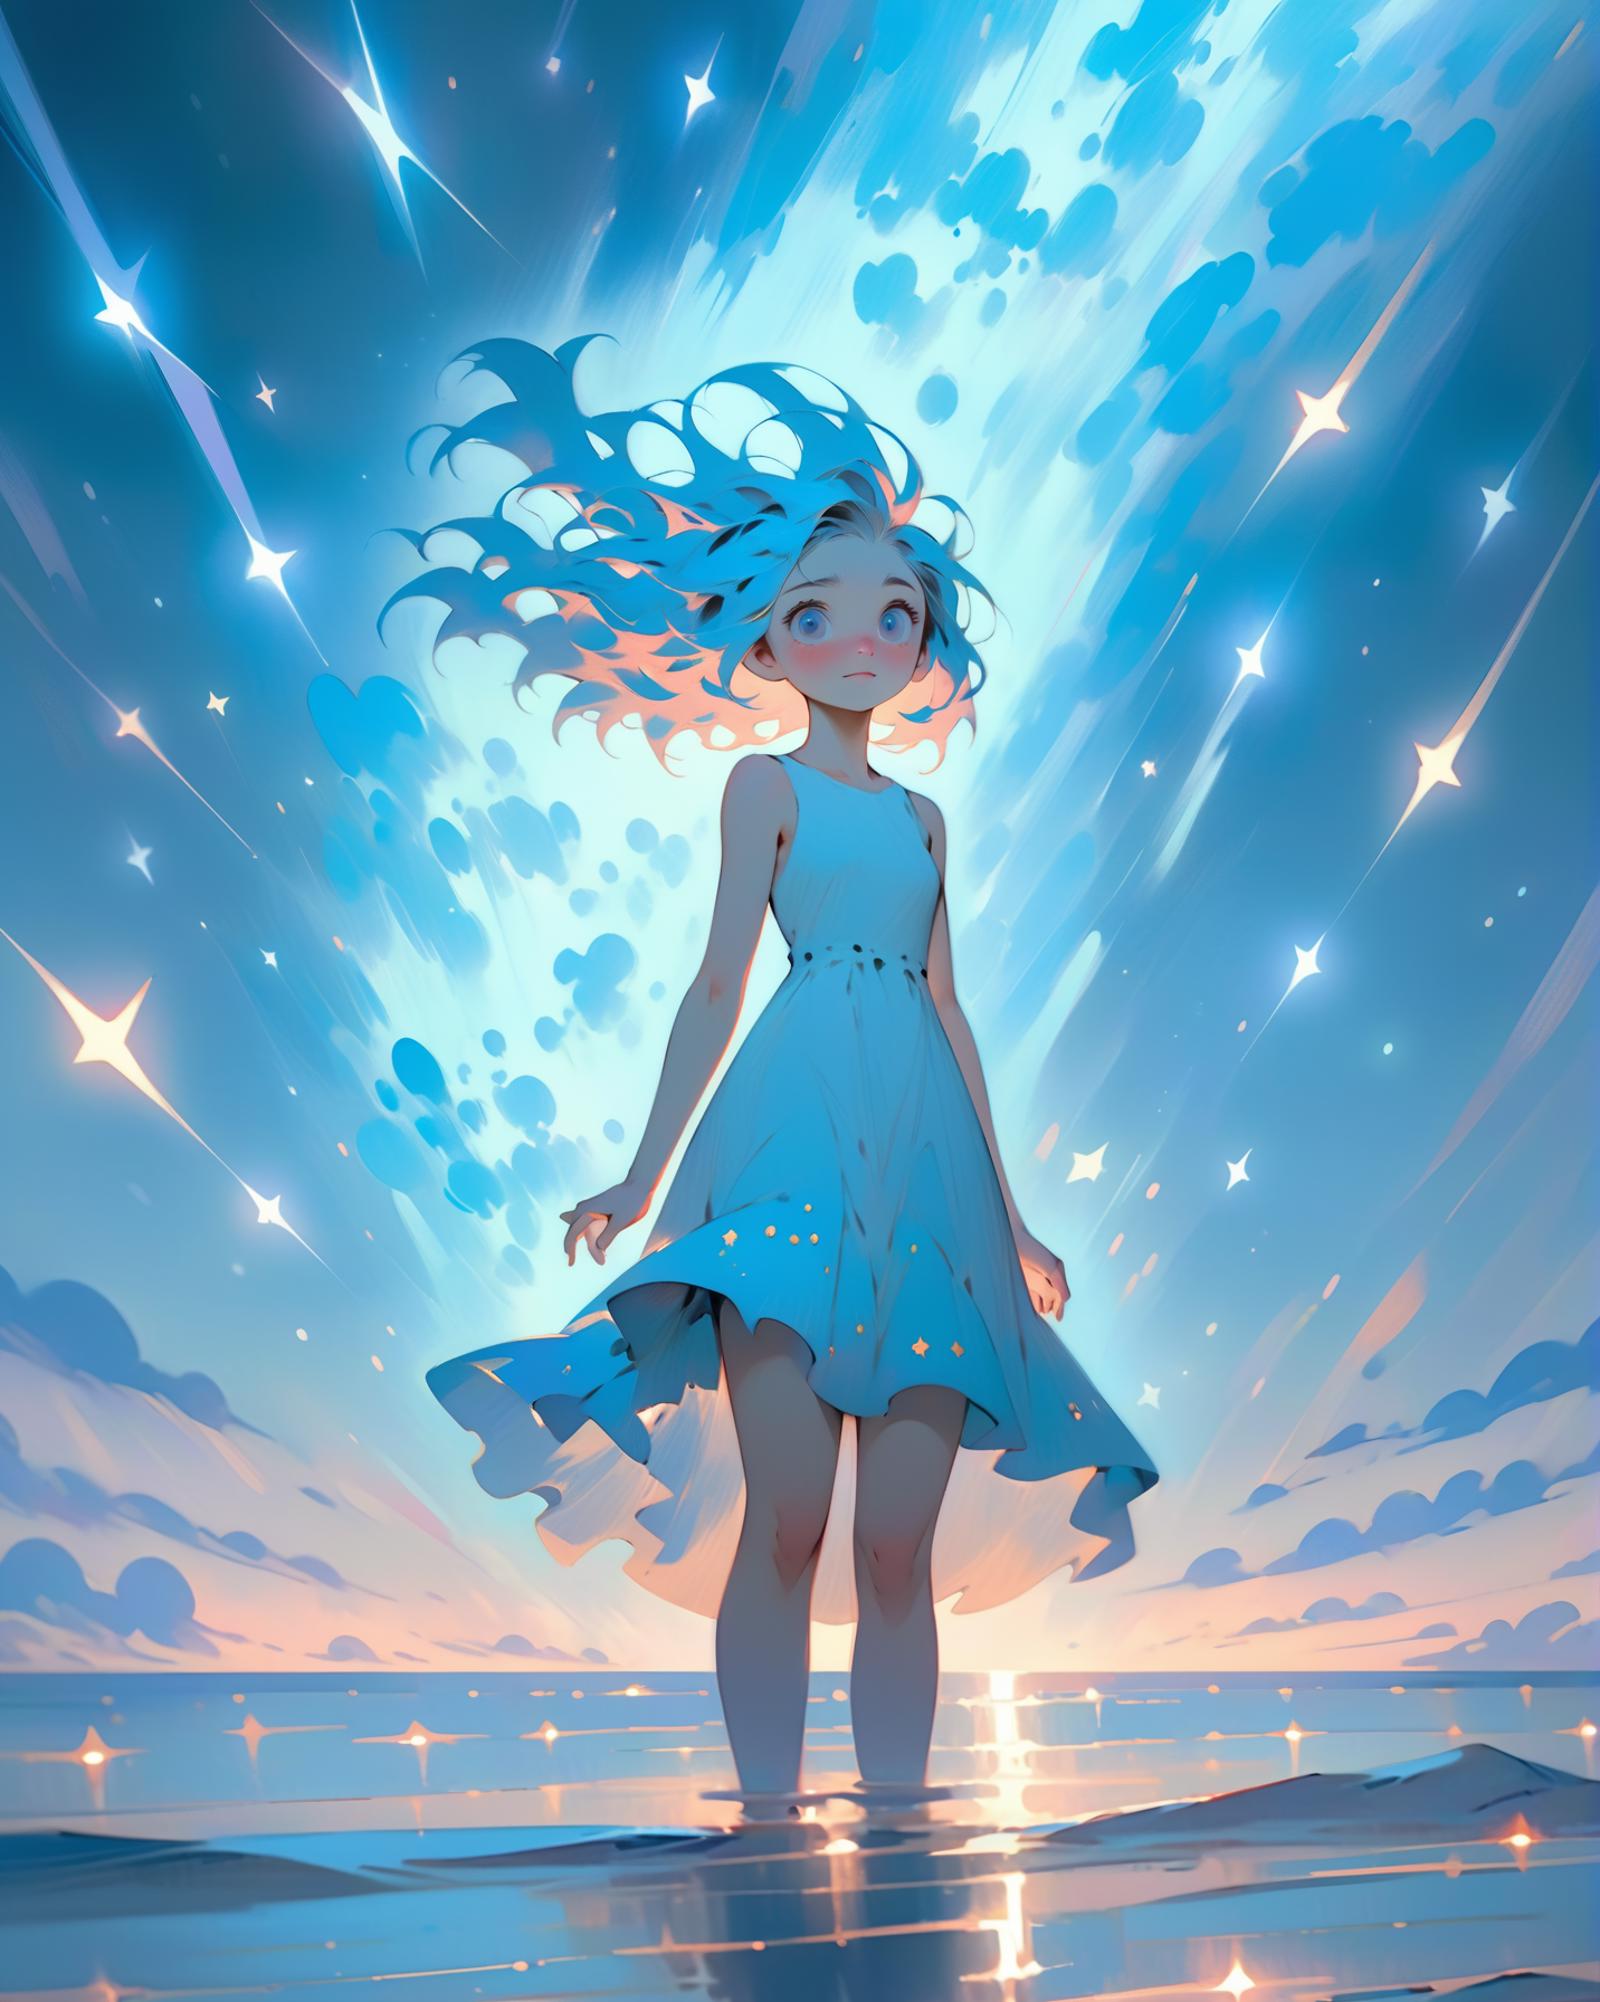 A blue-haired girl standing in the water under a starry sky.